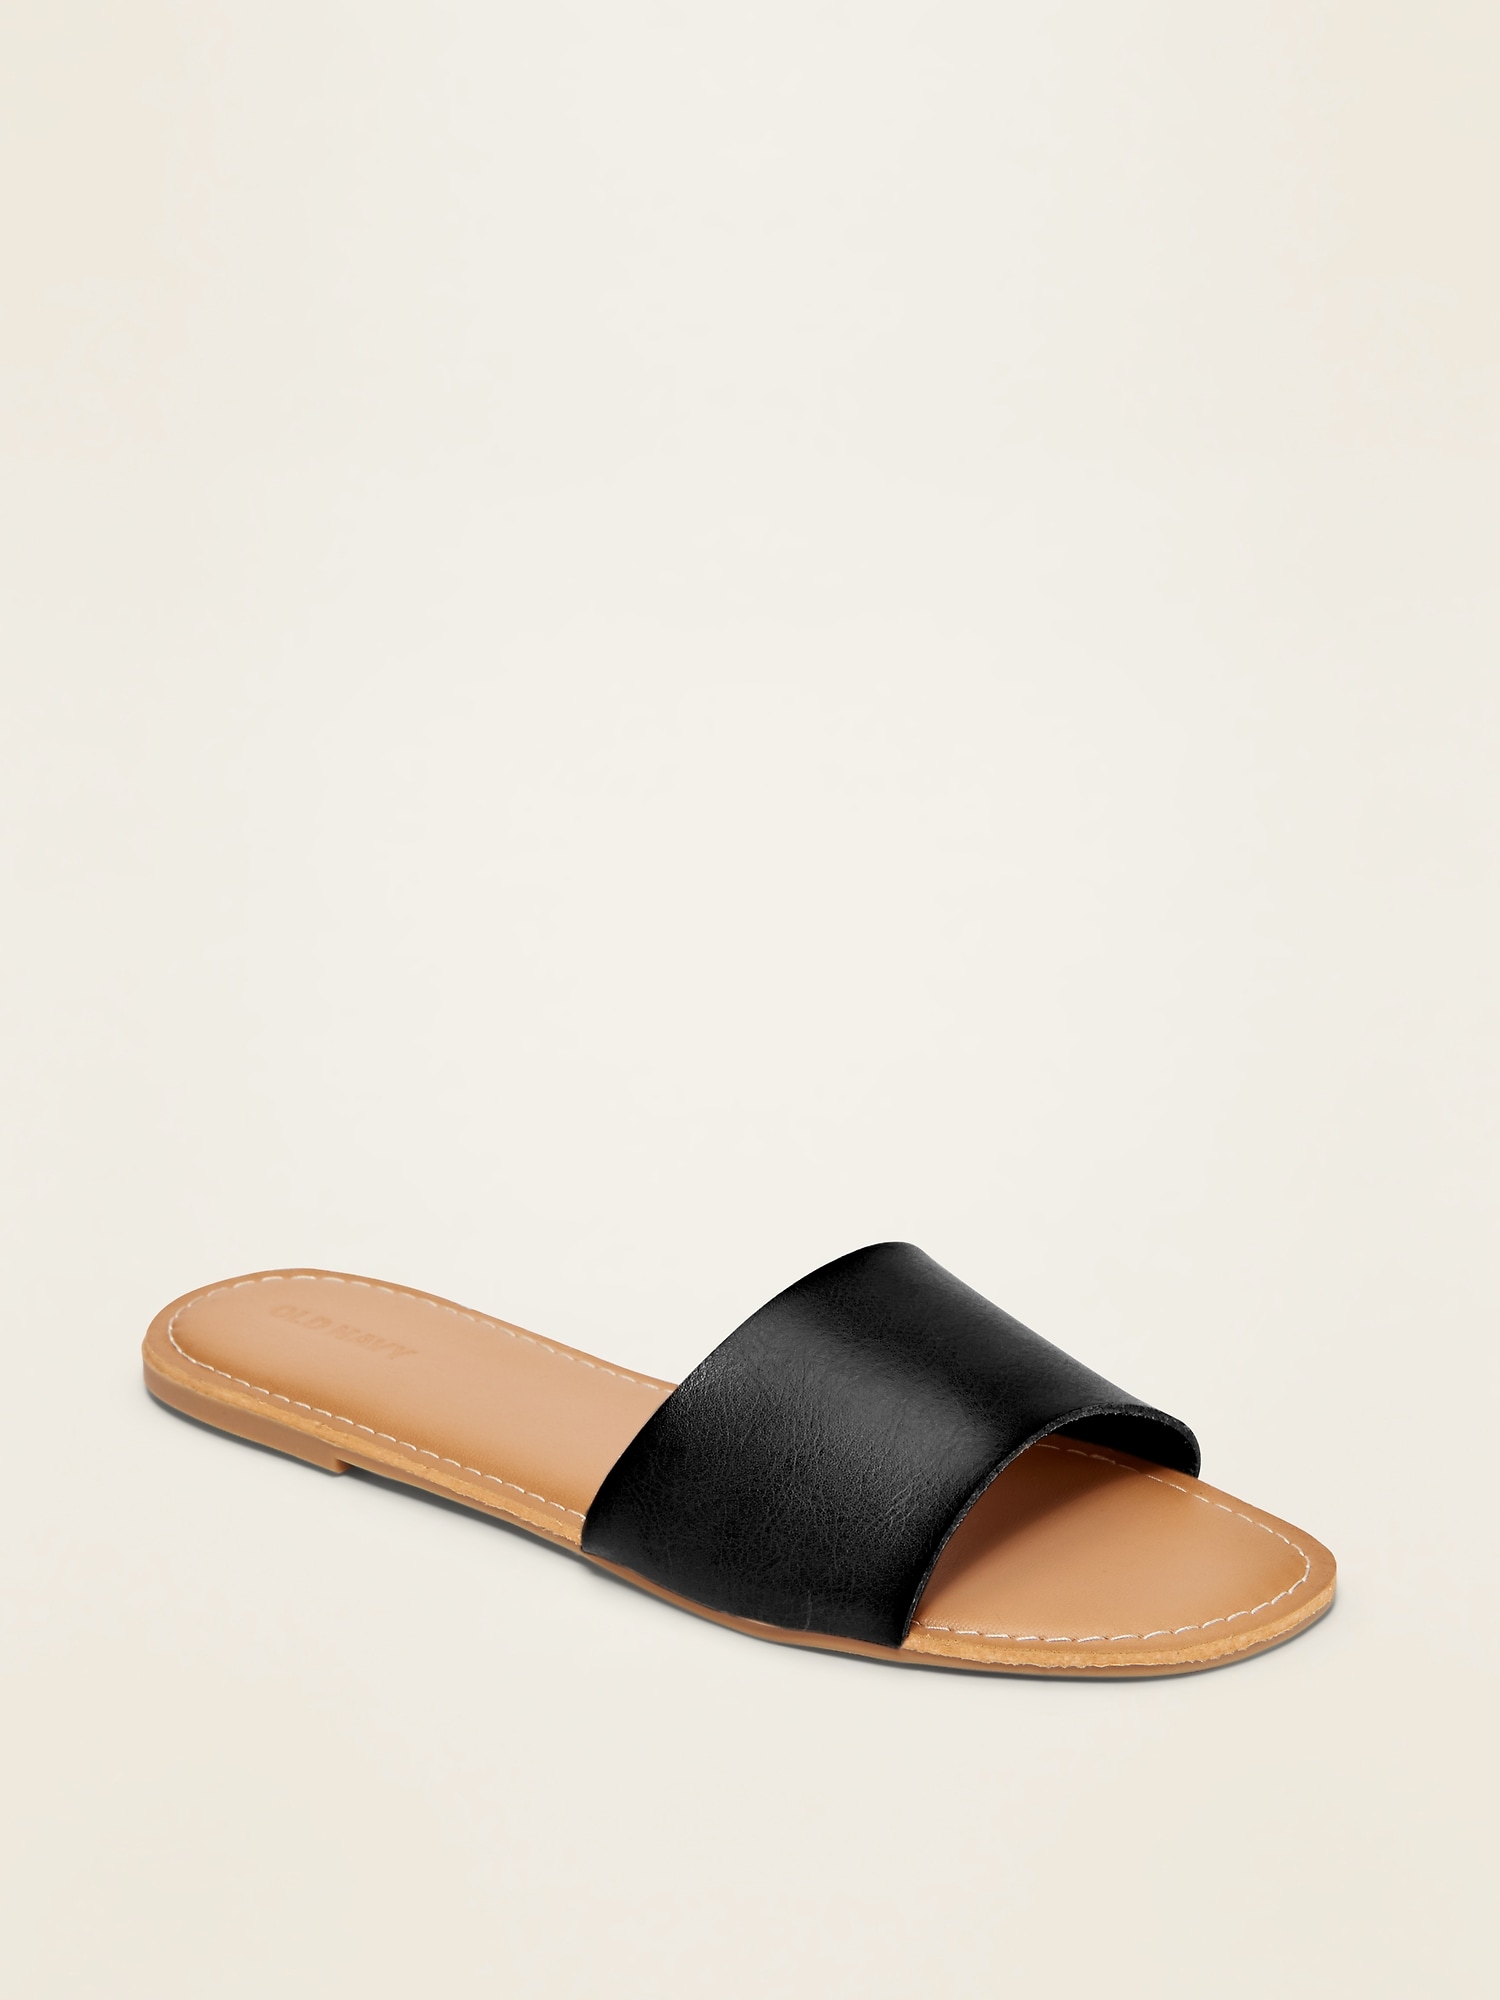 Faux-Leather Slide Sandals for Women 